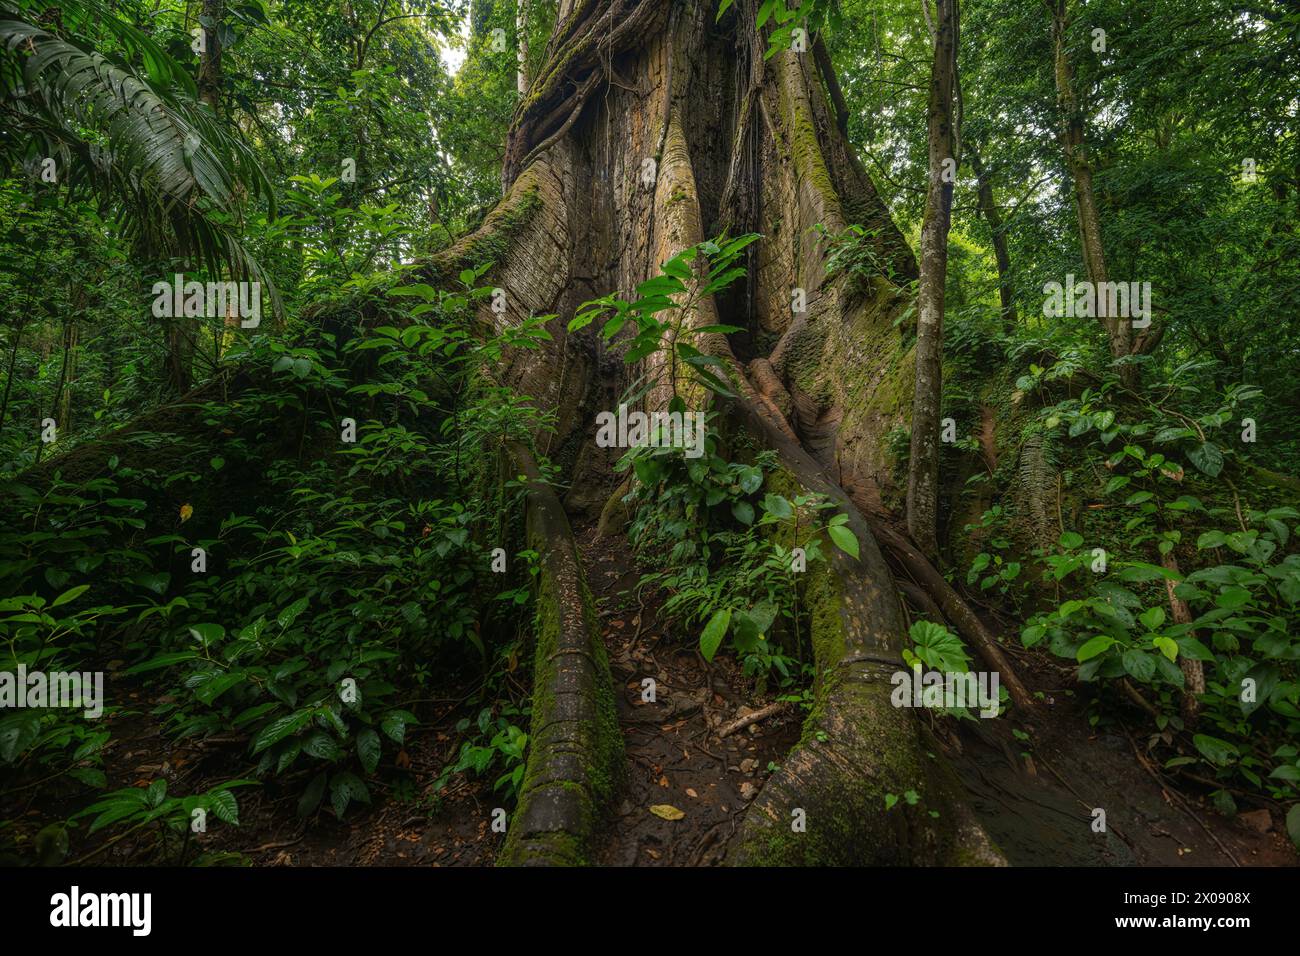 A towering tree with massive roots winding through the verdant underbrush of a Costa Rican rainforest creates a scene of natural majesty. Stock Photo